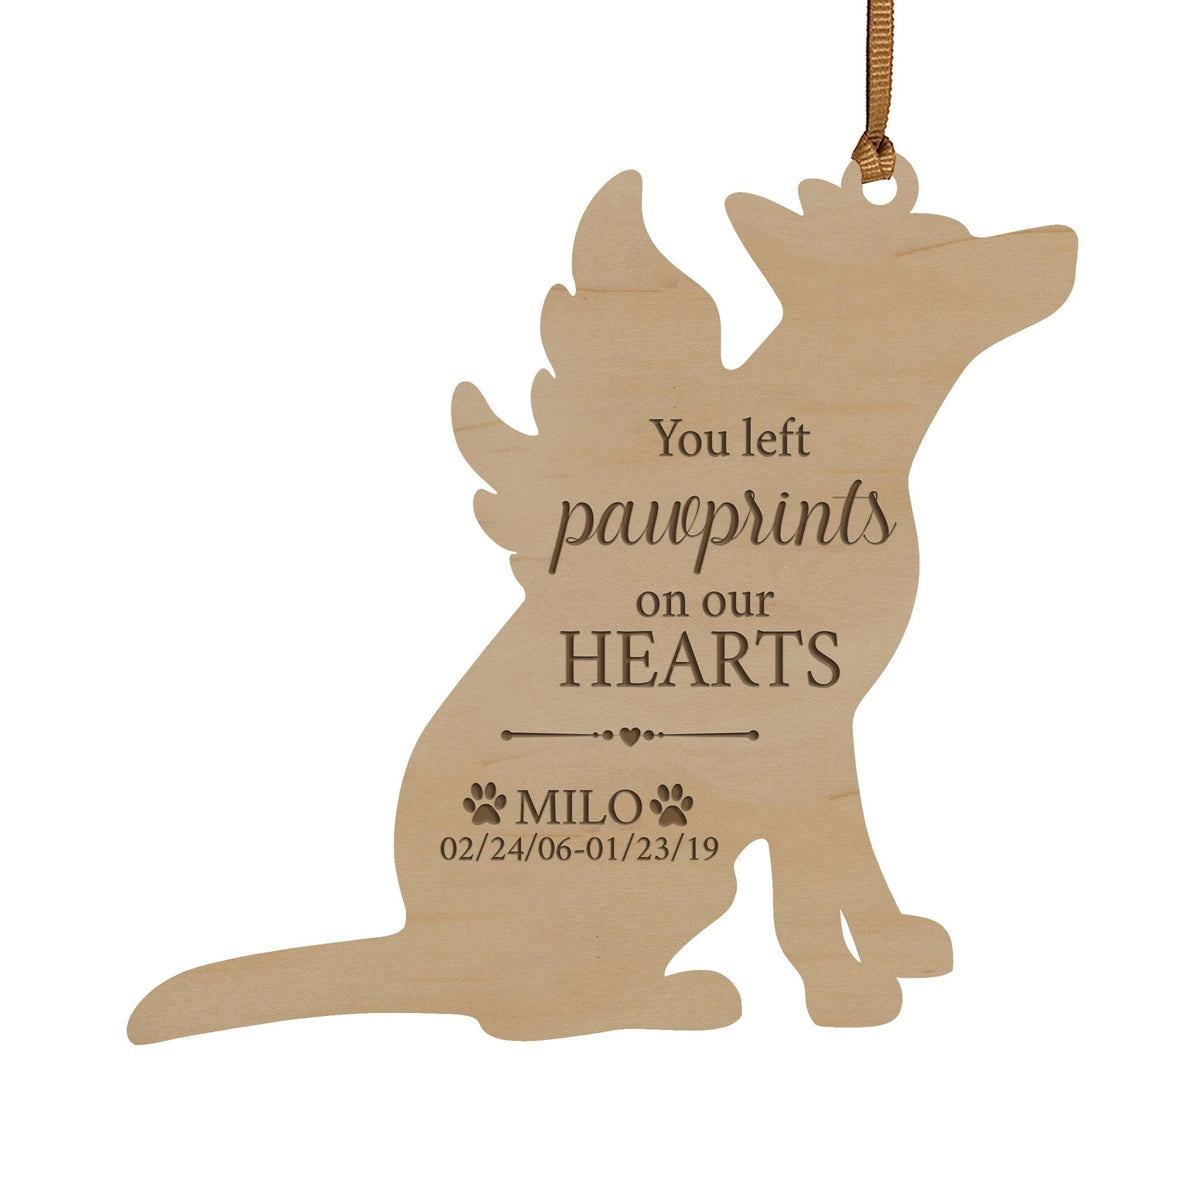 Personalized Engraved Memorial Dog Ornament 4.9375” x 5.375” x 0.125” - You left pawprints (PAWS) - LifeSong Milestones